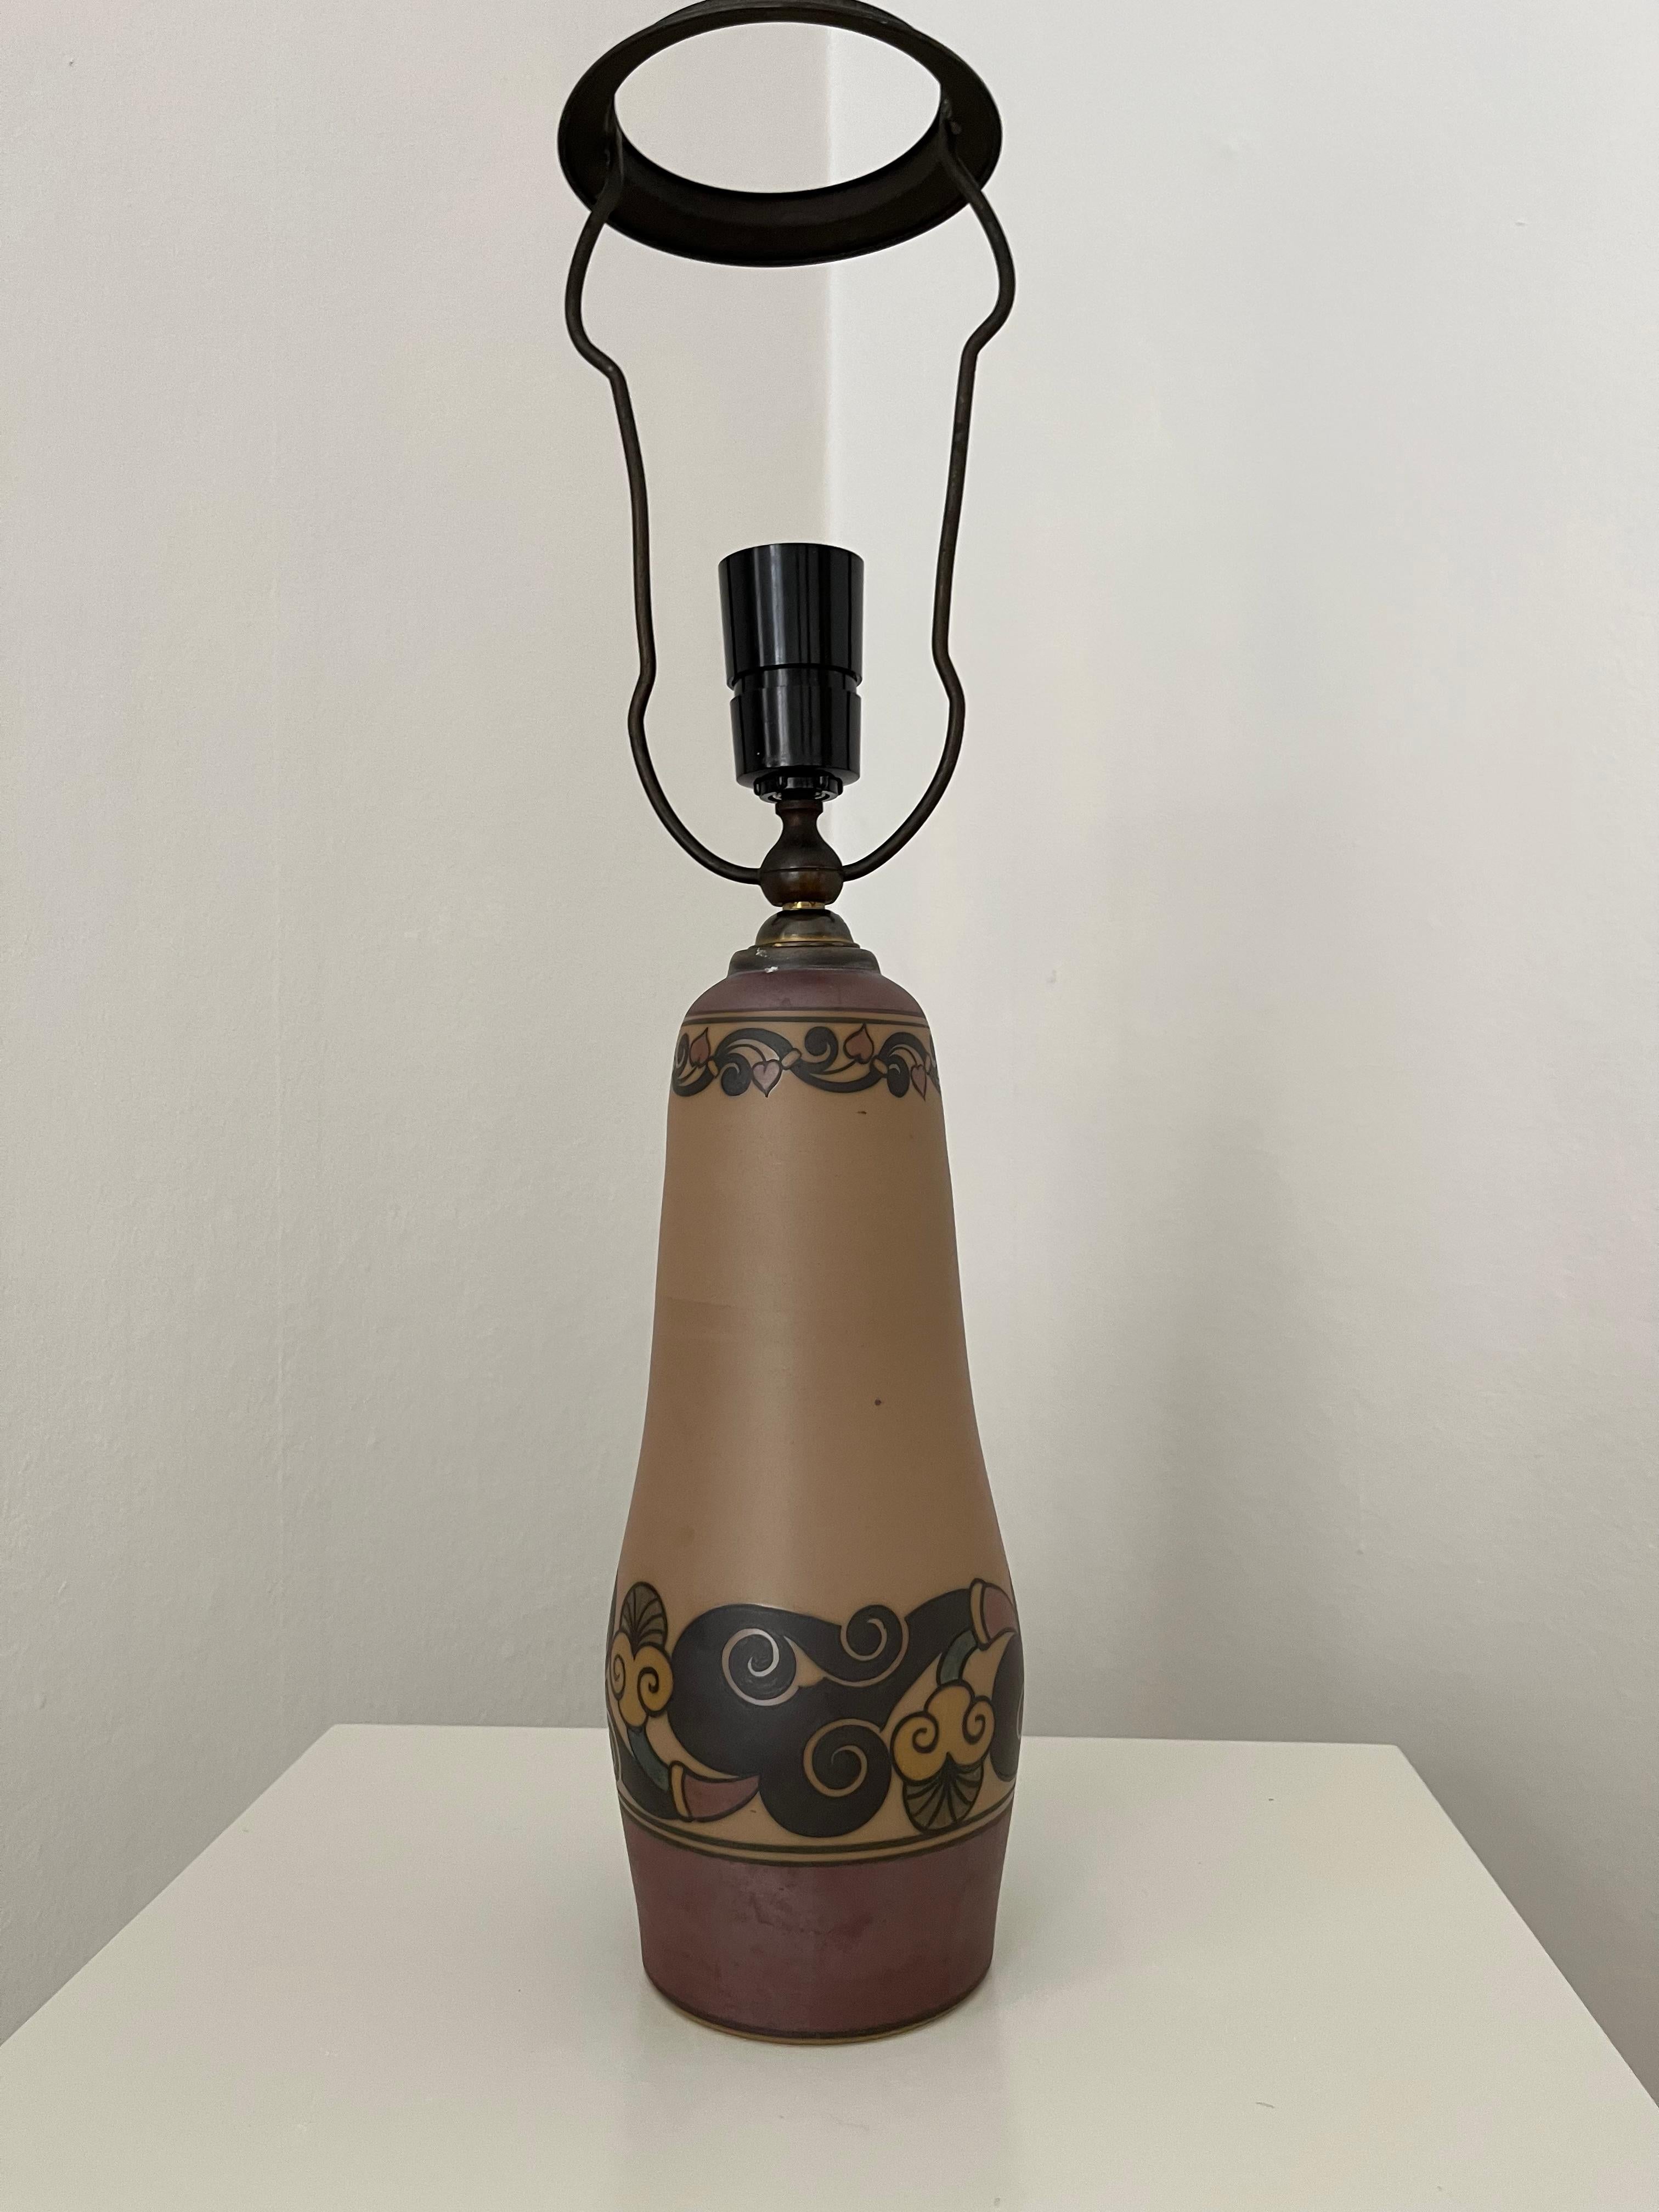 Art nouveau Danish ceramic table lamp is hand decorated, made by L. Hjort ceramic factory. This tall table lamp is from the 1930s and in very good condition. Sold without the shade.

Hjorths ceramic factory is one of the best-preserved industrial